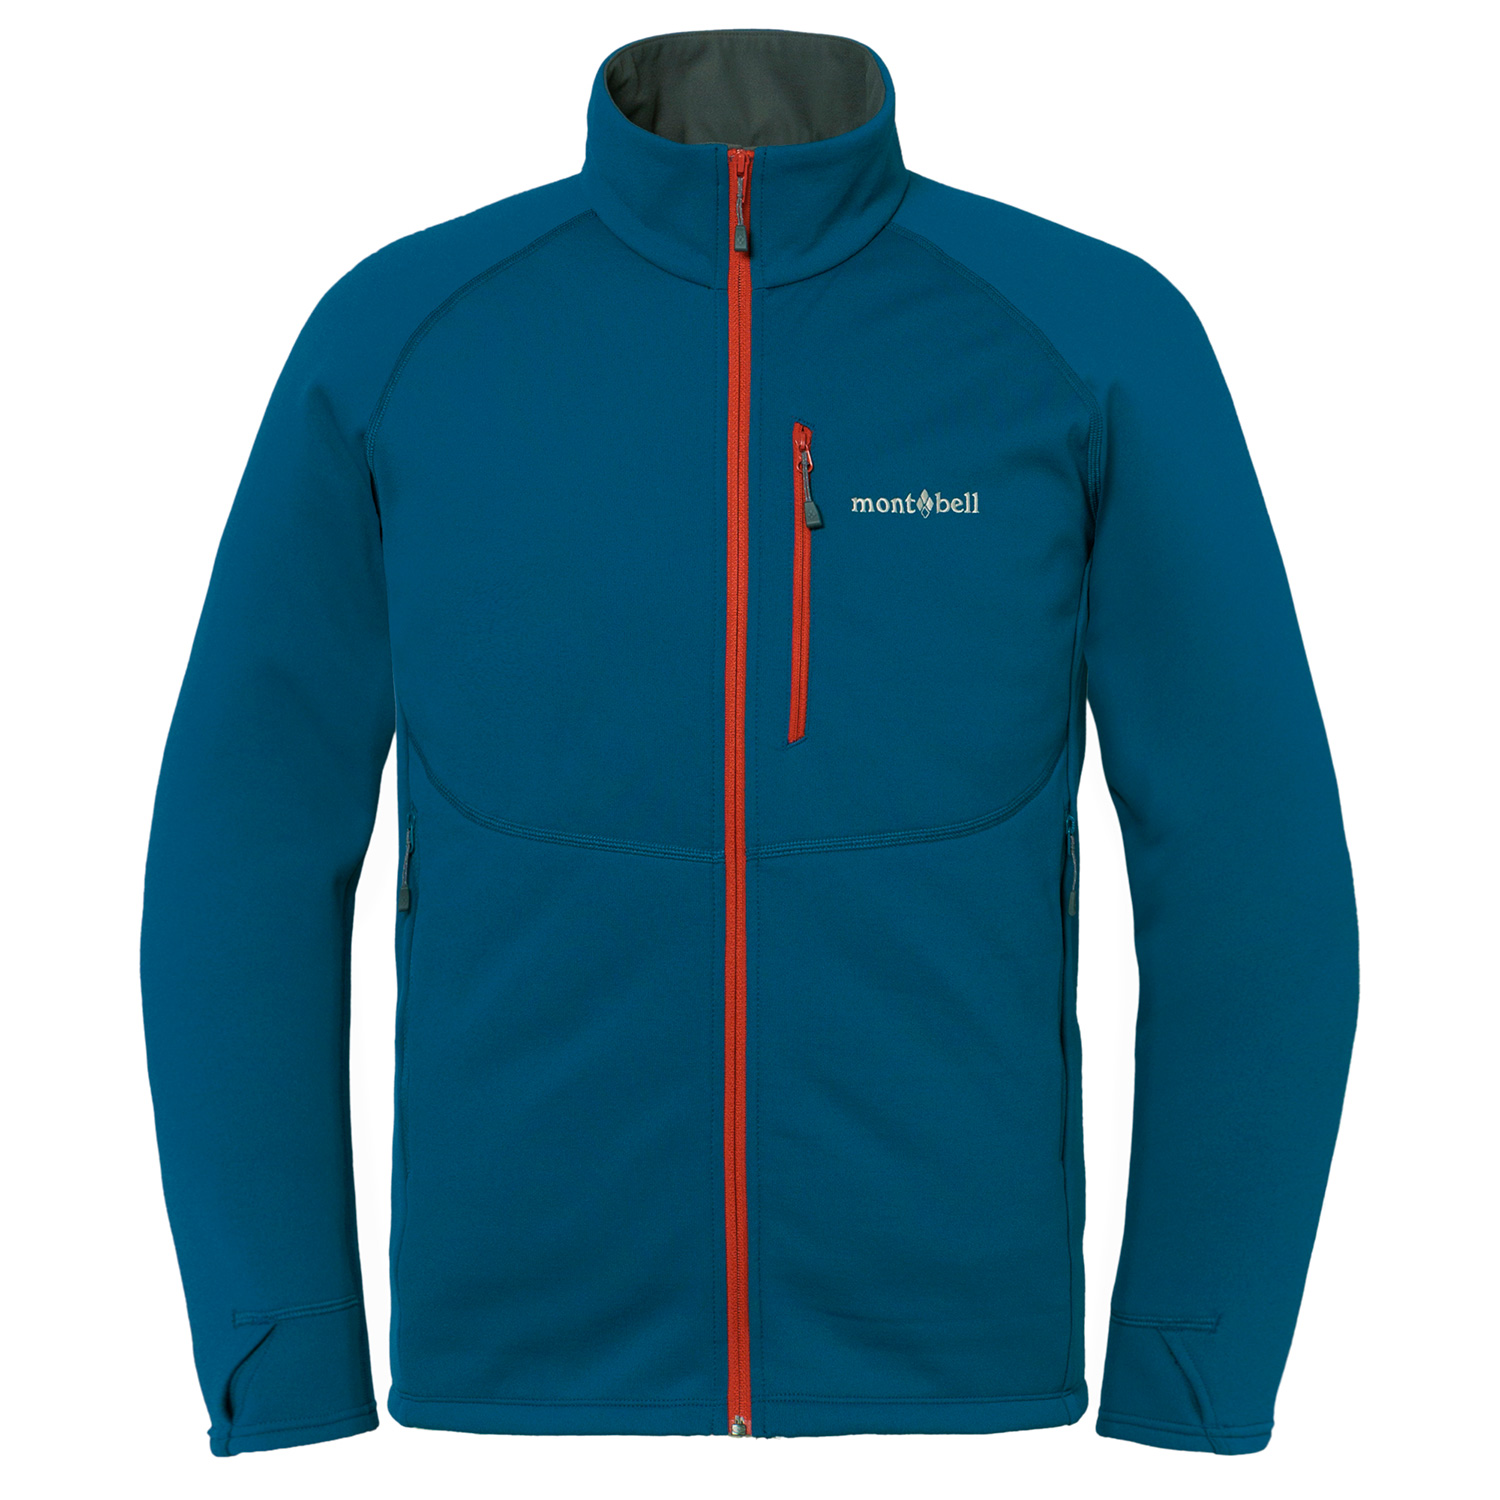 Trail Action Jacket Men's | Montbell America